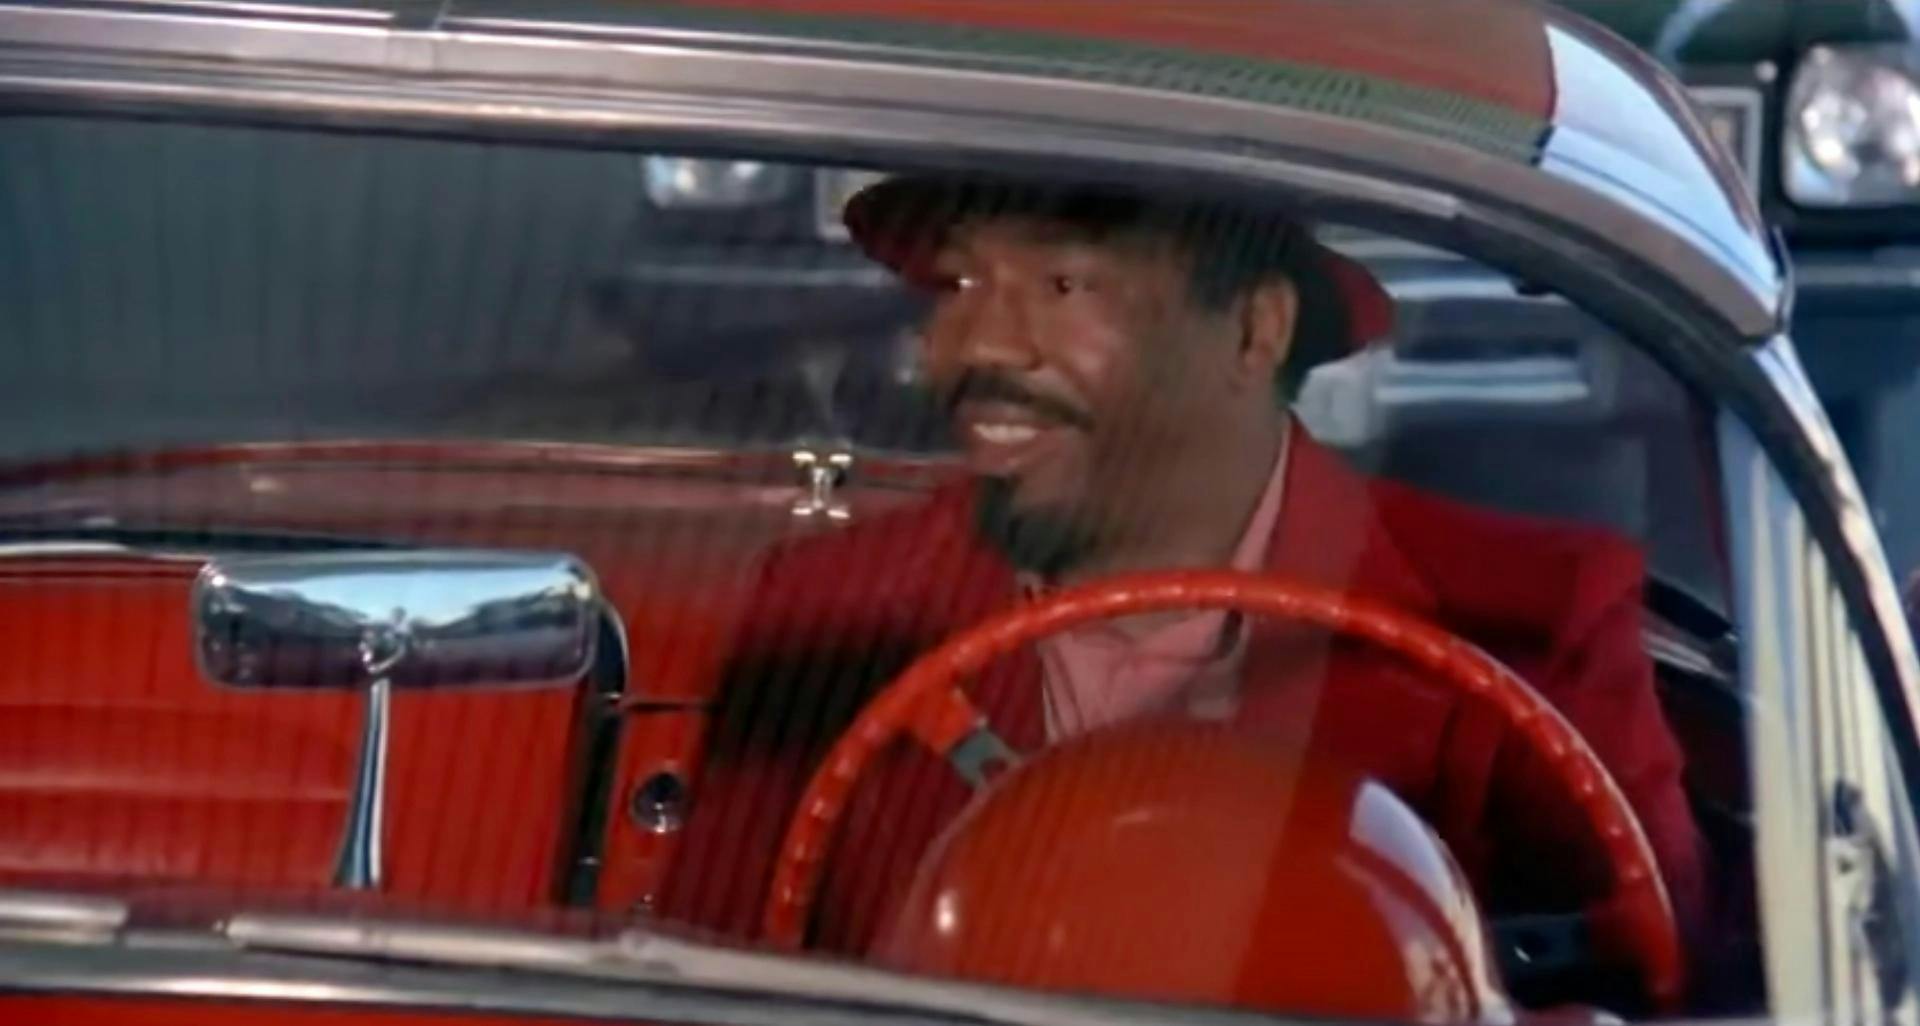 A man in a red suit and hat in a red car